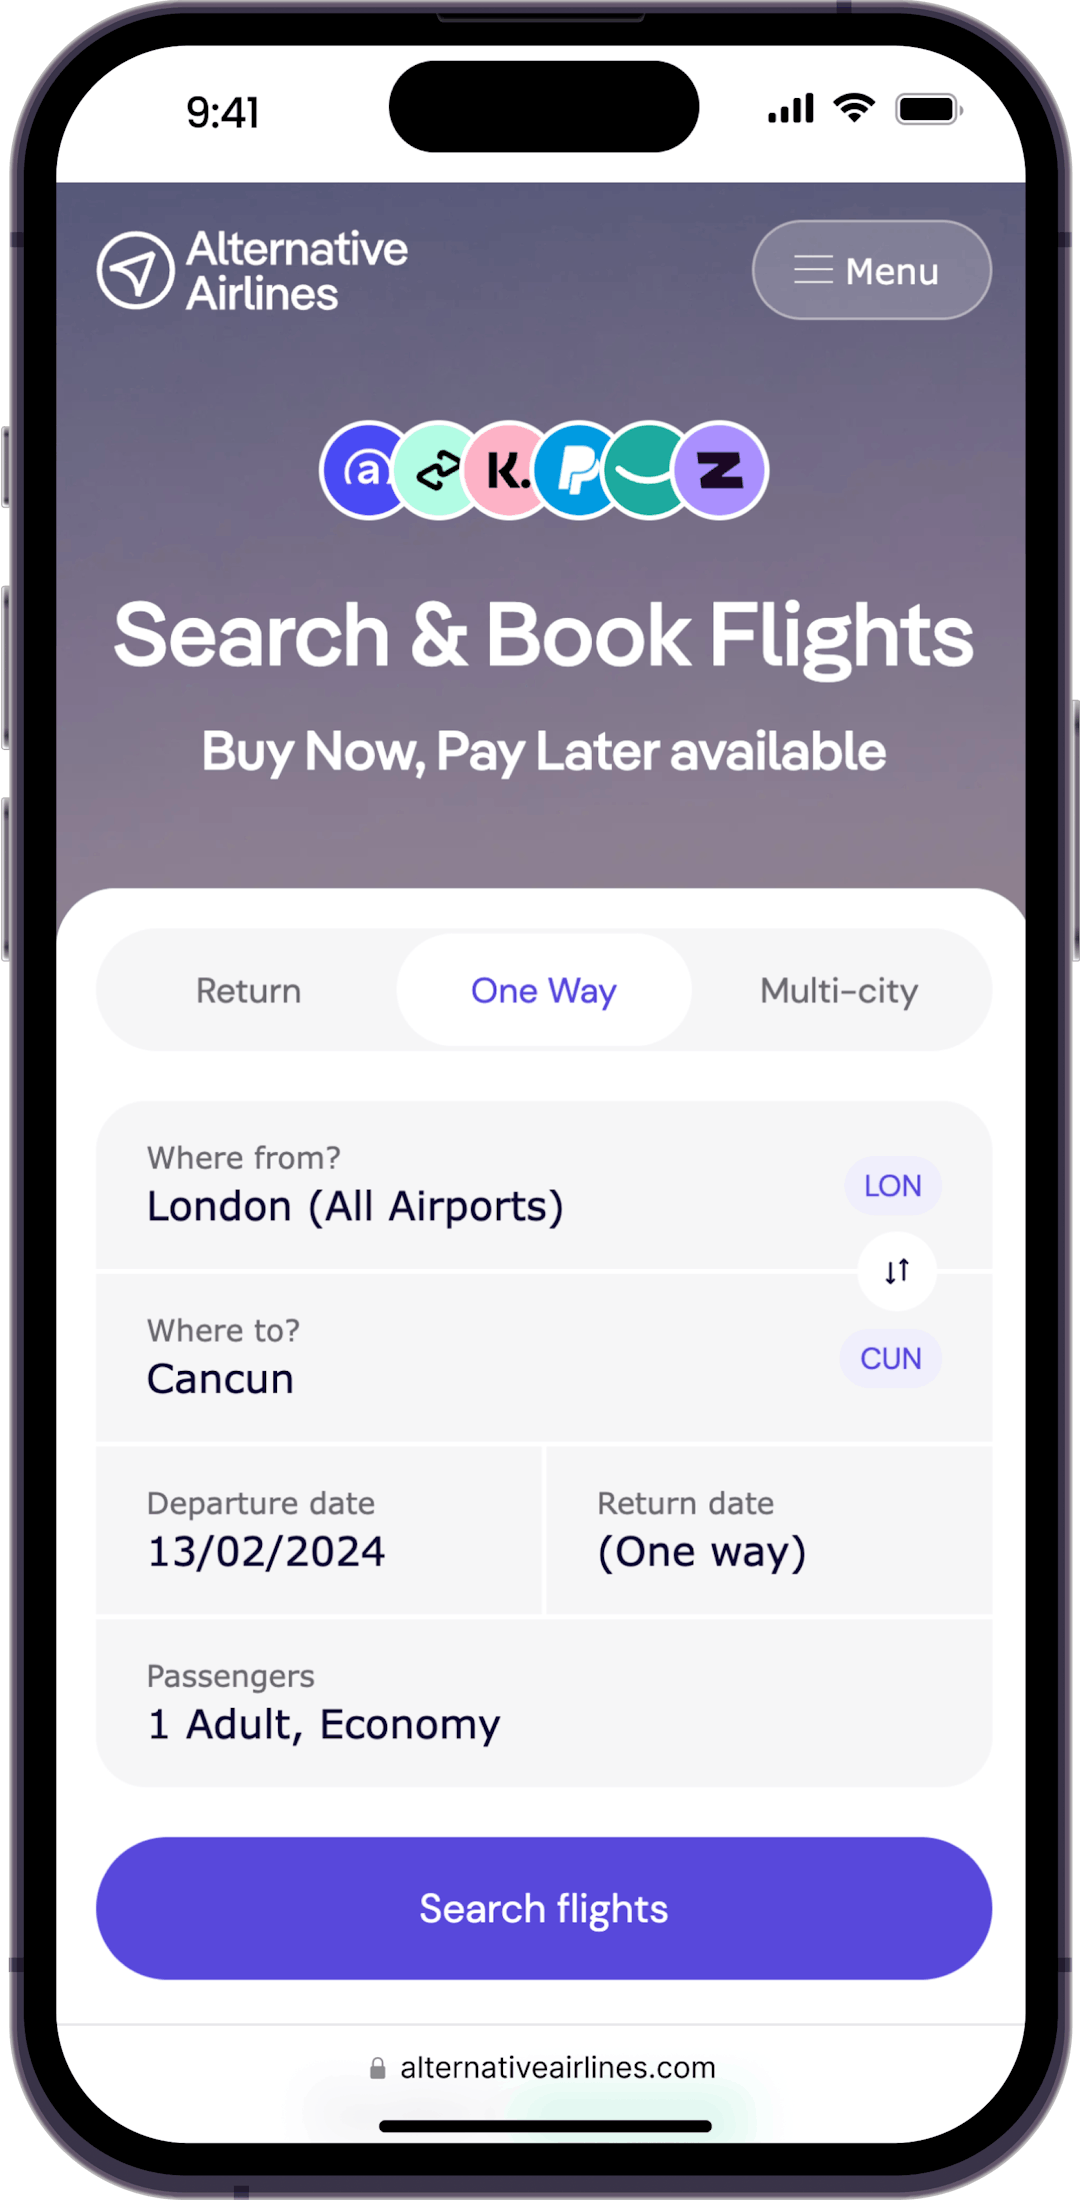 Step 1 - Search for flights from London to Cancun